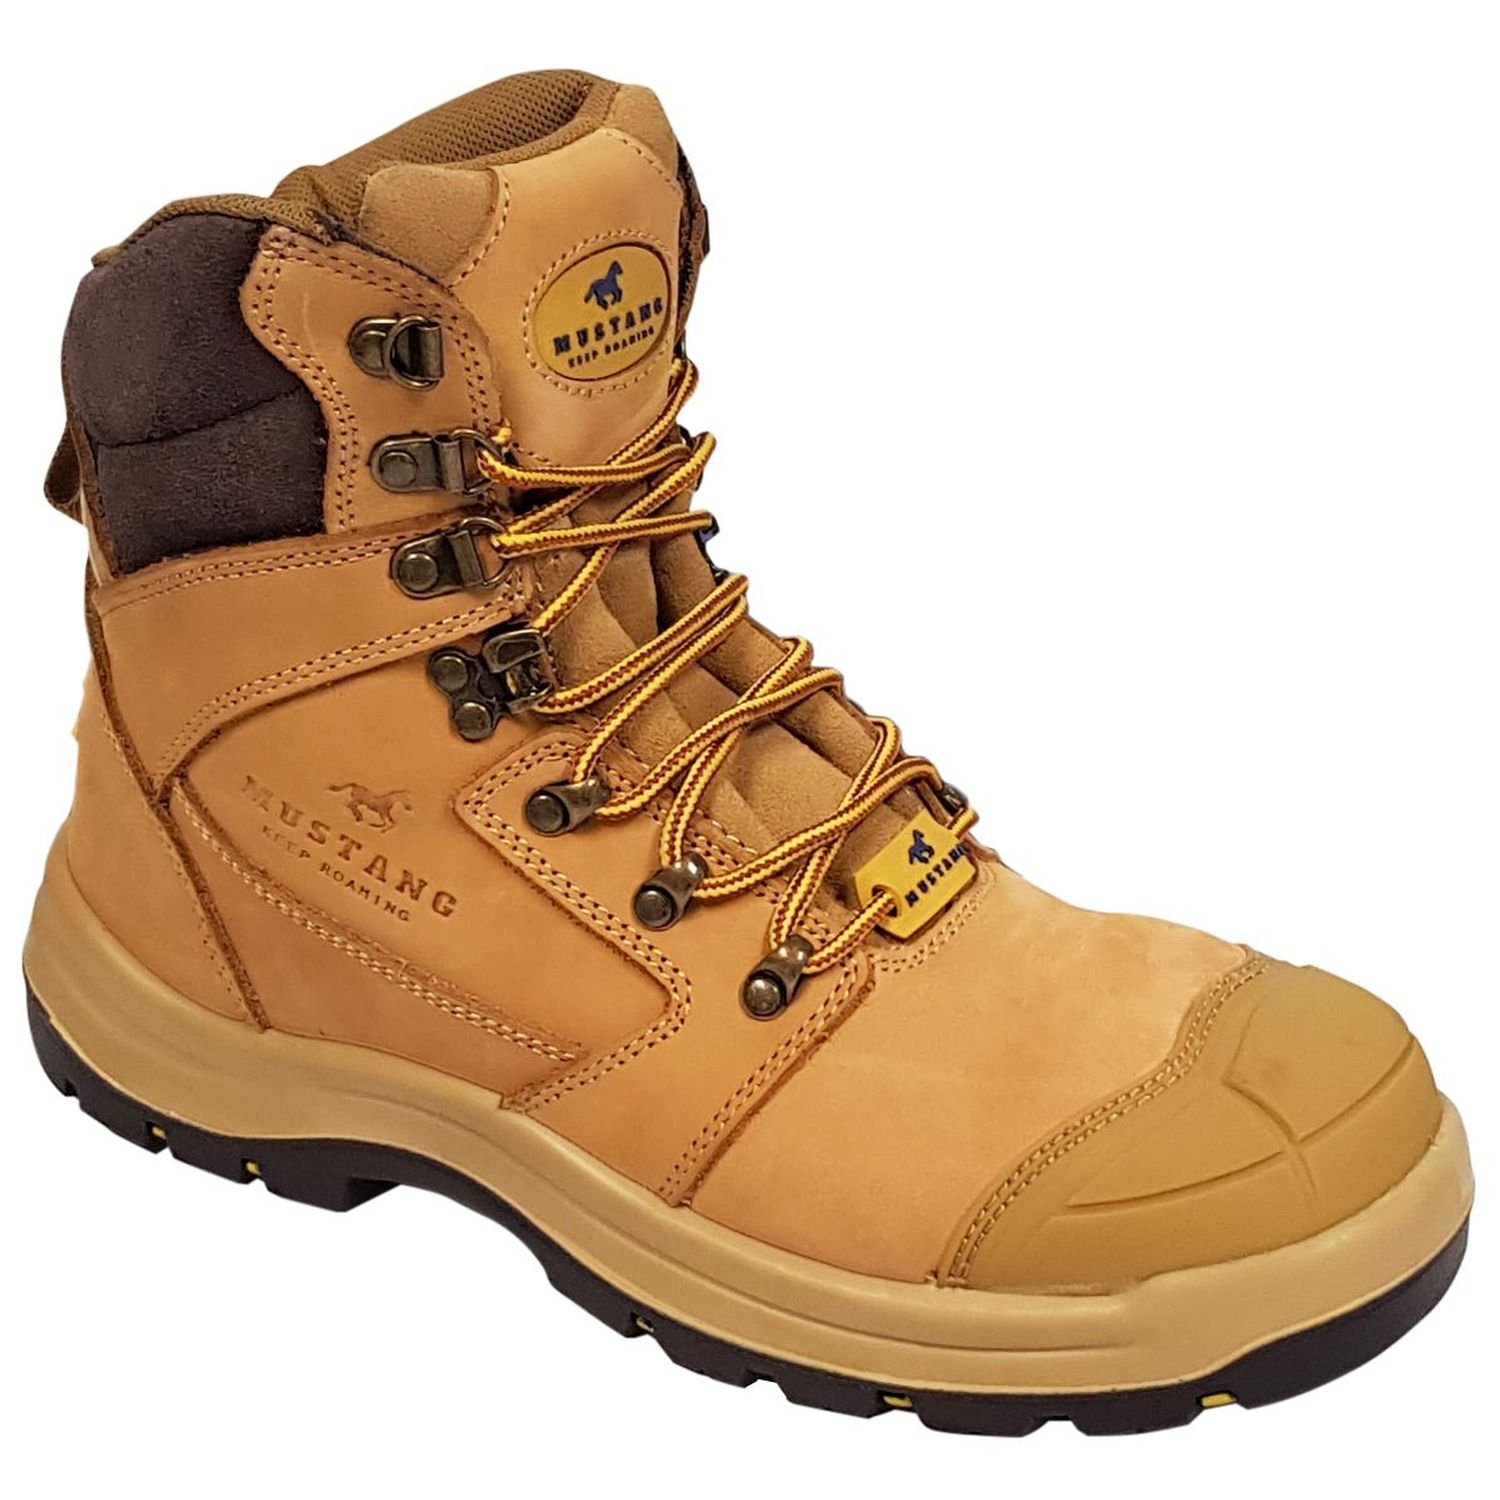 Mustang 7120 Nitrile Sole 300°C Lace Up Safety Boot with Scuff Cap CLEARANCE